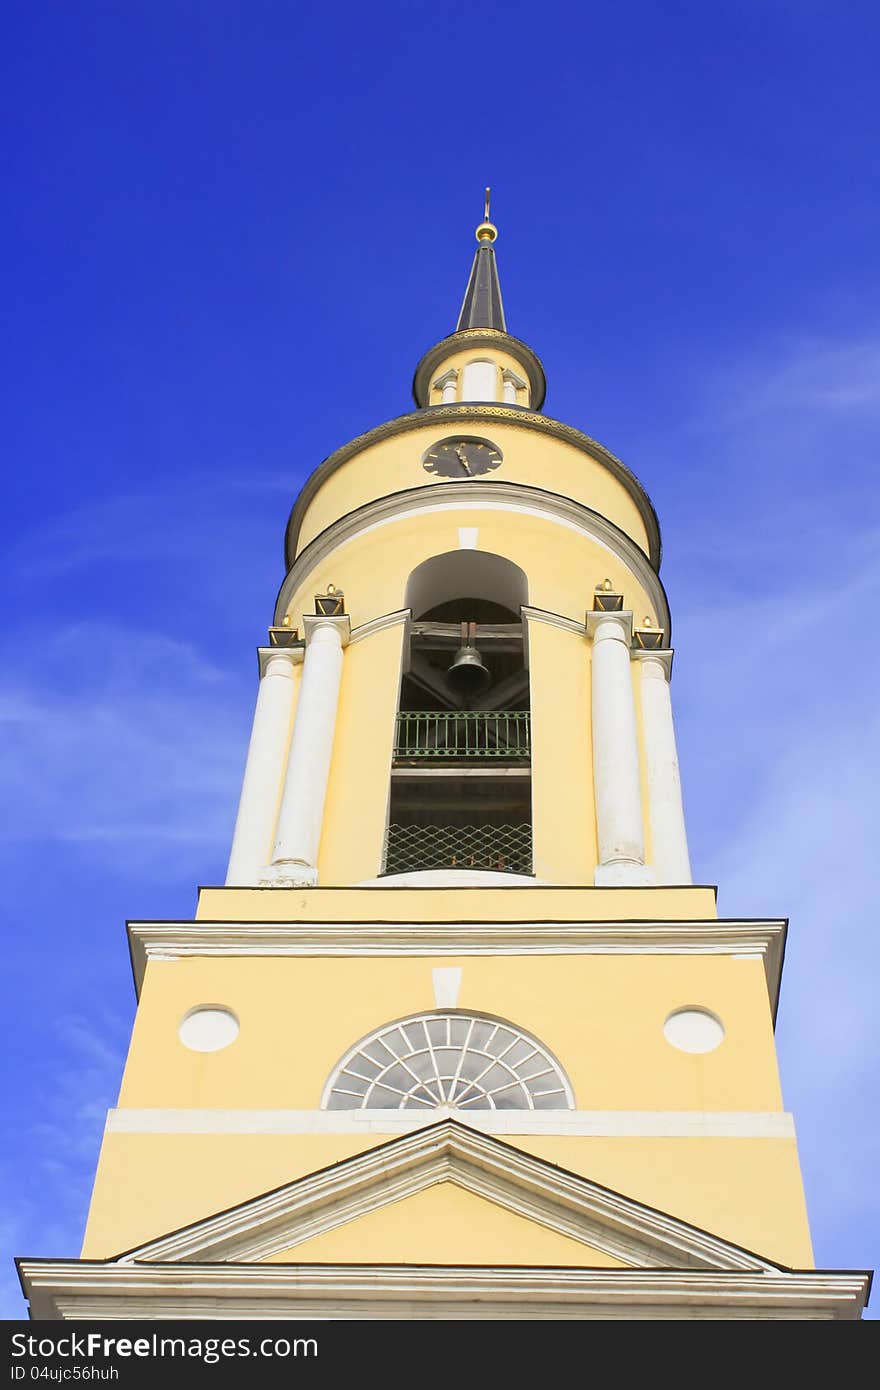 Photo of bell tower of yellow church with hours, cross, arches and columns, bells against blue morning sky. Photo of bell tower of yellow church with hours, cross, arches and columns, bells against blue morning sky